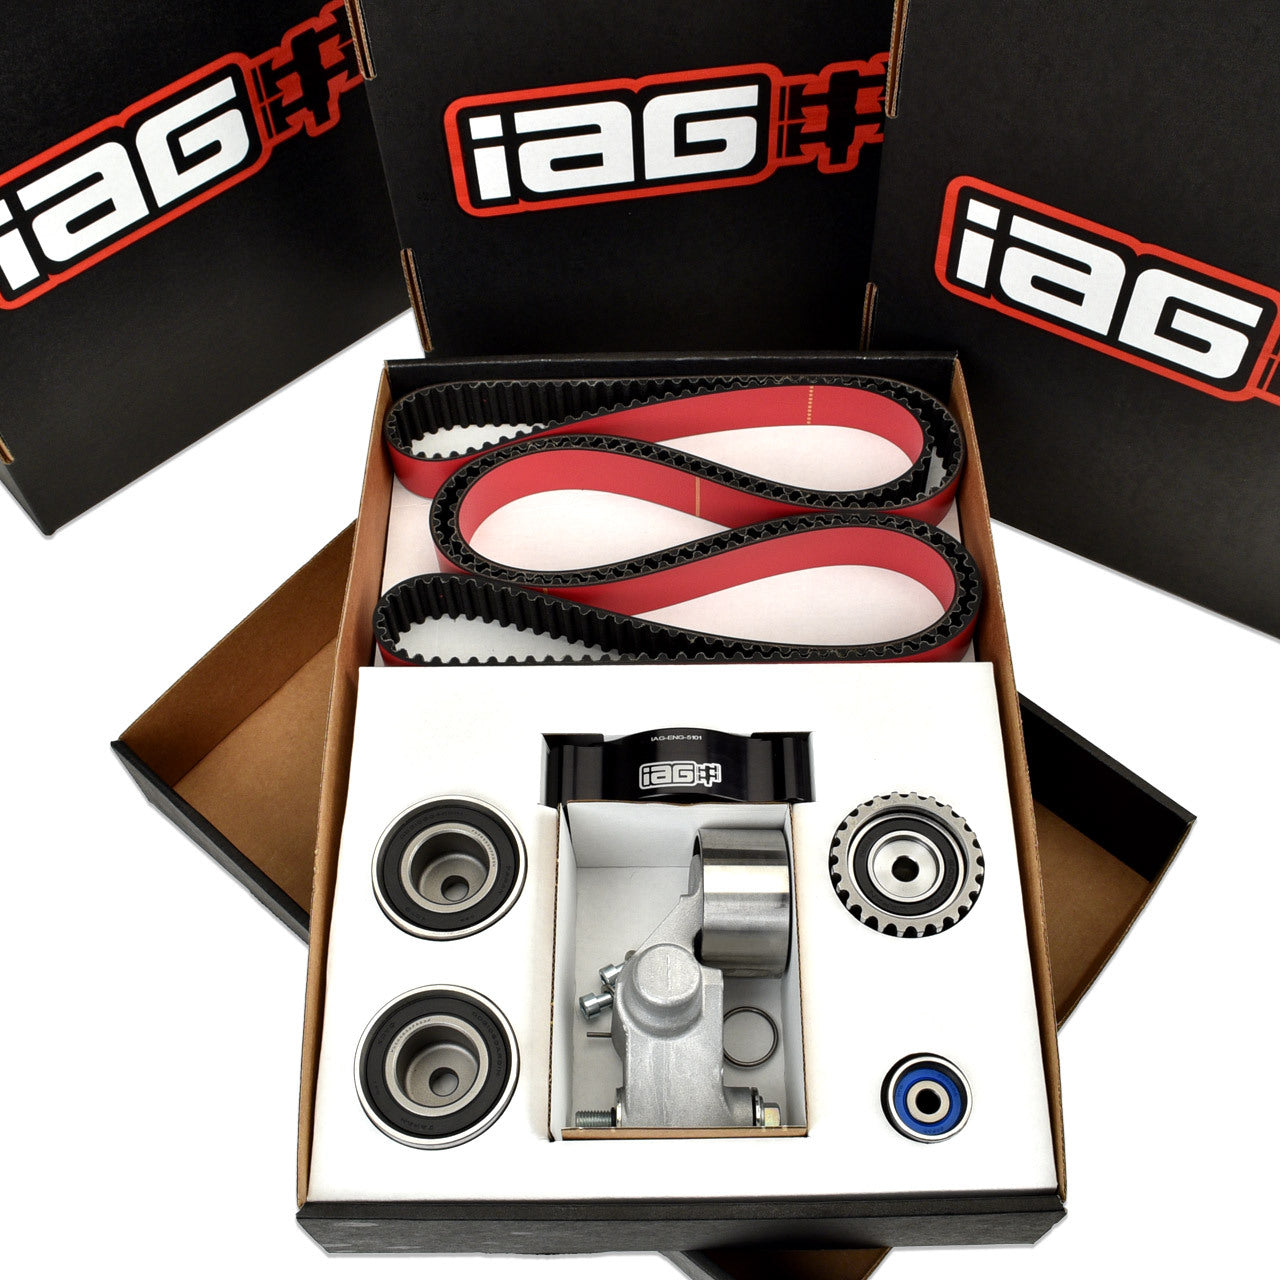 IAG - Timing Belt Kit with IAG Red Racing Belt, Timing Guide, Idlers & Tensioner - 02-14 Subaru WRX, 04-21 STi, 05-12 LGT, 04-13 FXT